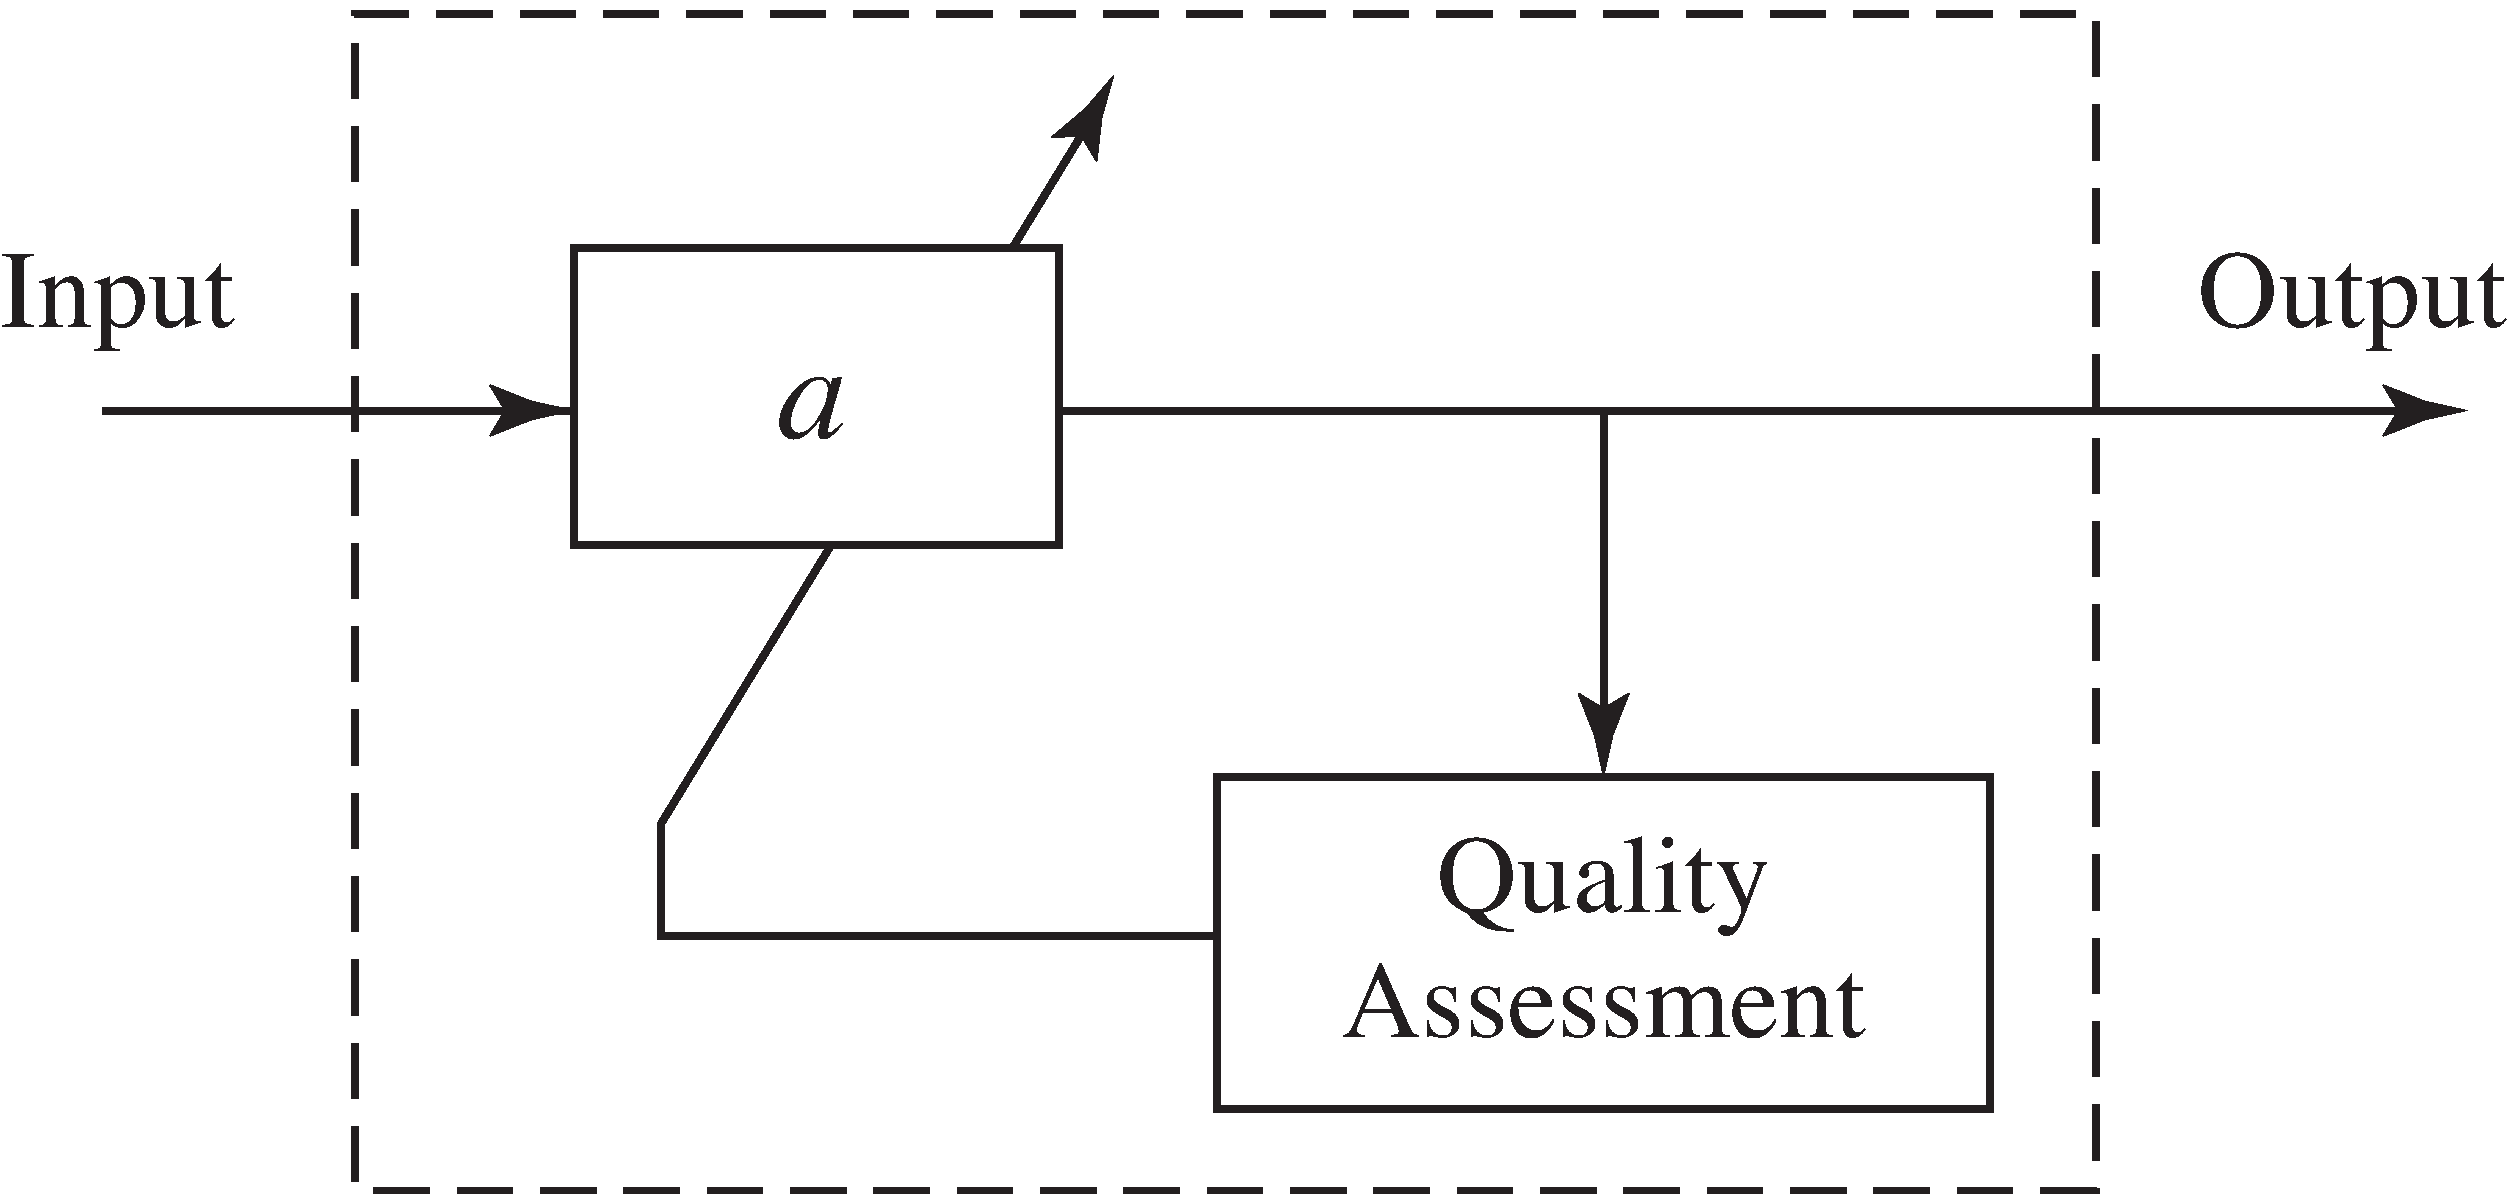 The adaptive element is a subsystem that transforms the input into the output (parameterized by a) and a quality assessment mechanism that evaluates how to alter a, in this case, whether to increase or decrease a.